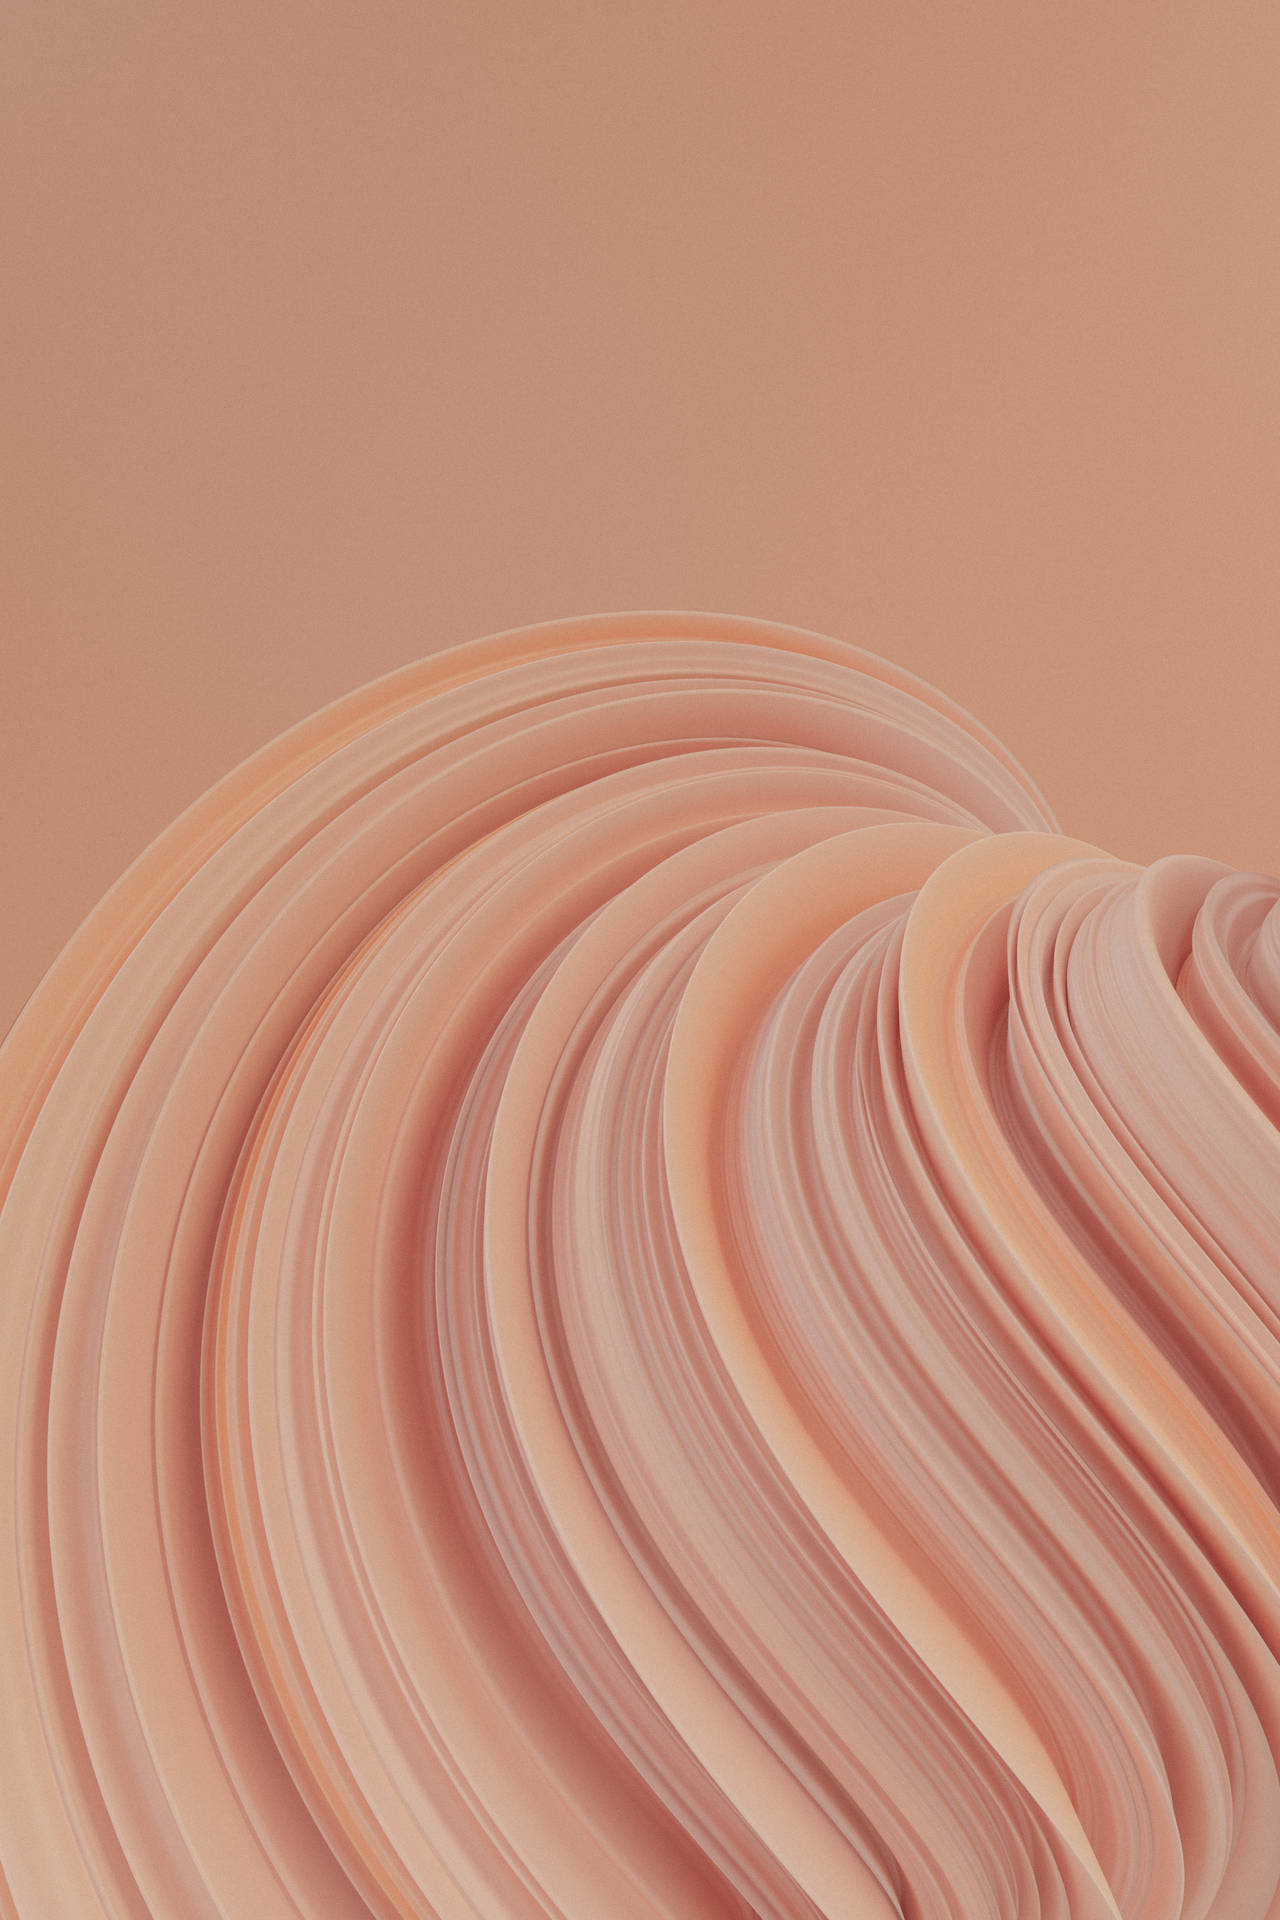 Frosting In Pastel Orange Aesthetic Color Background